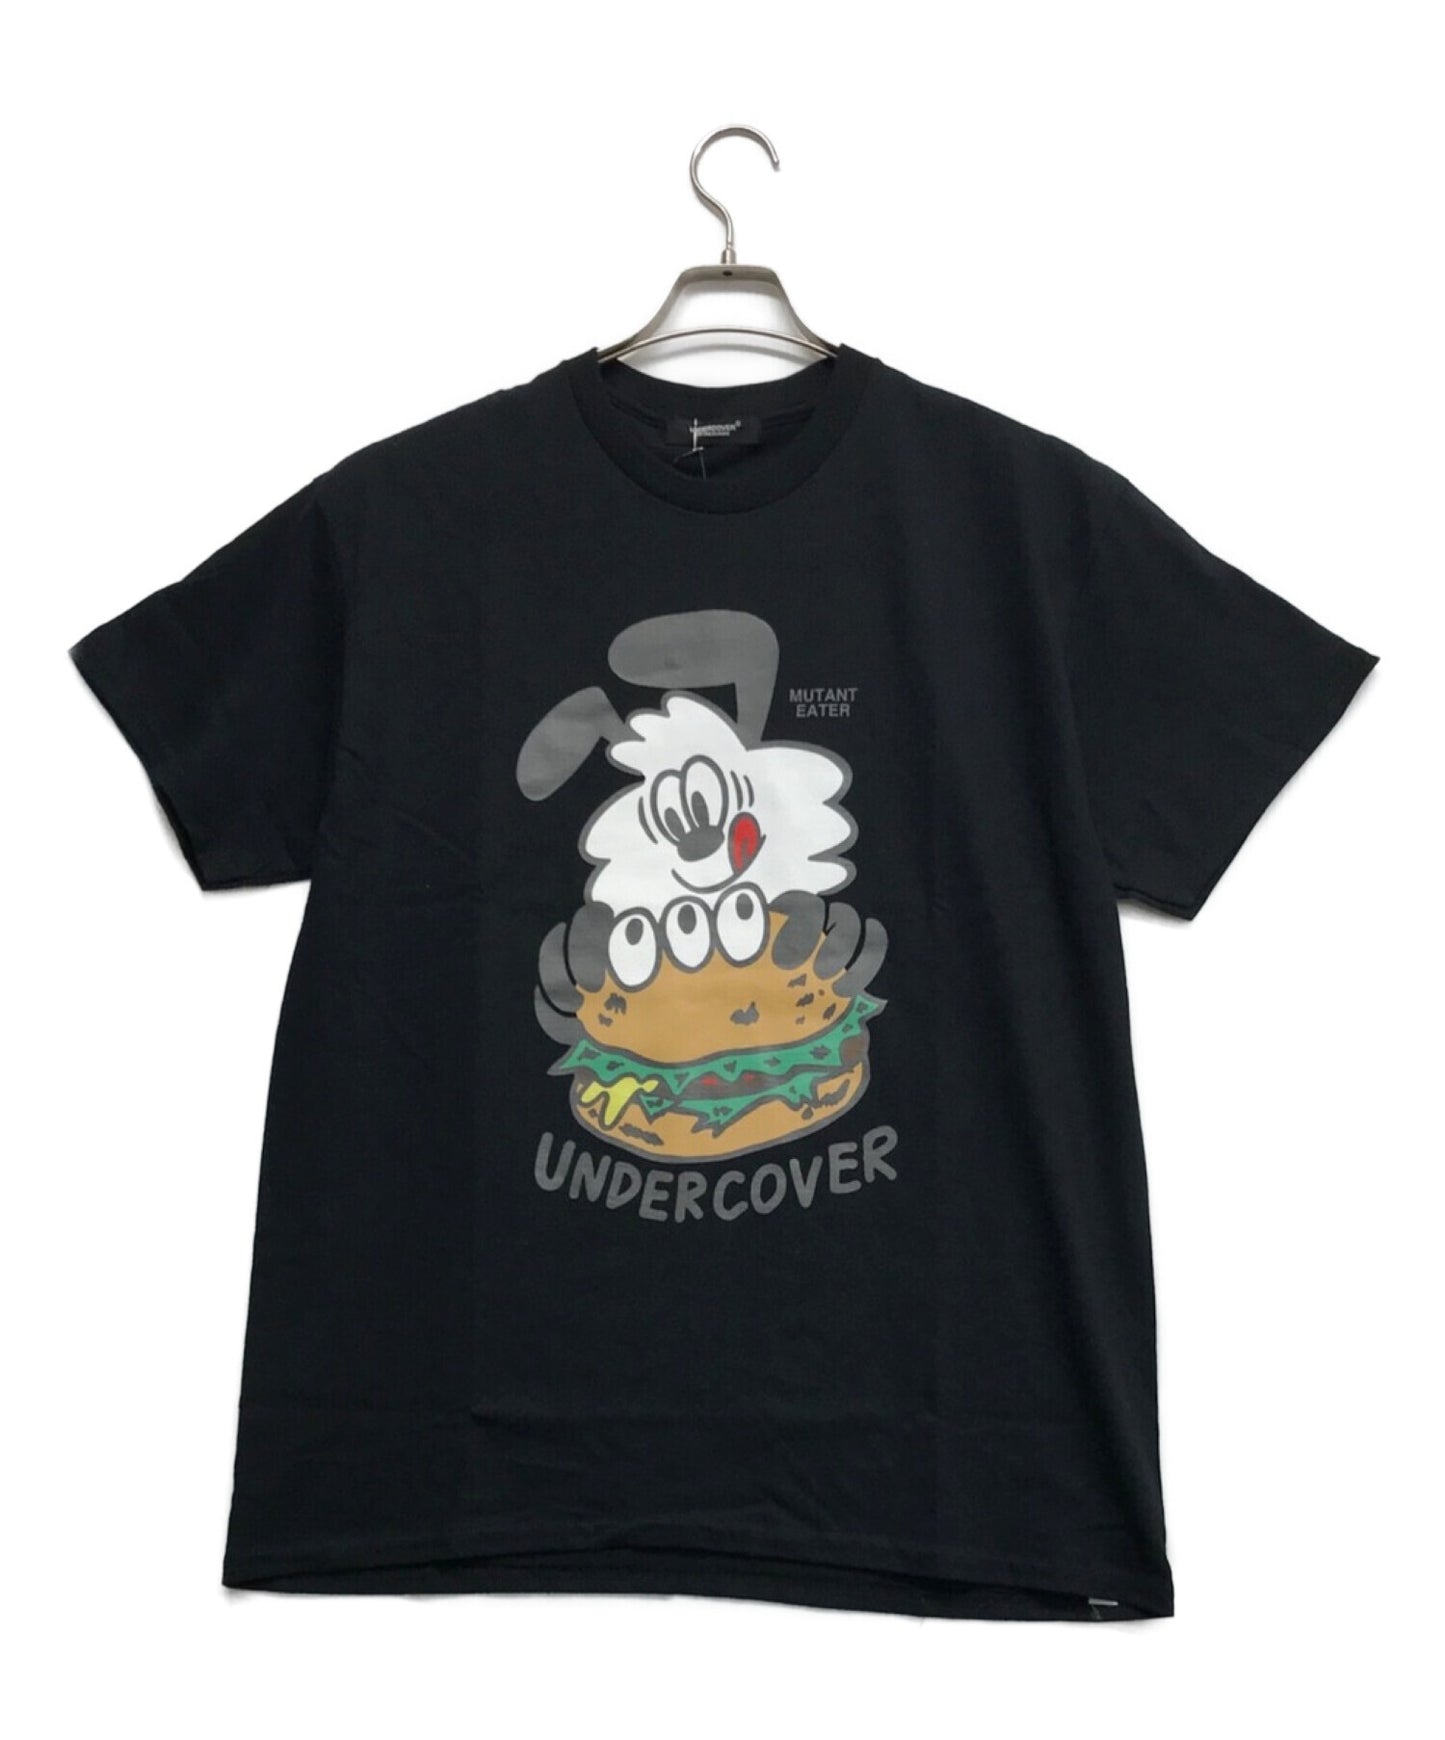 UNDERCOVER Collaboration Printed T-shirts Printed T-shirts Short Sleeved T-shirts T-shirts US2B9816